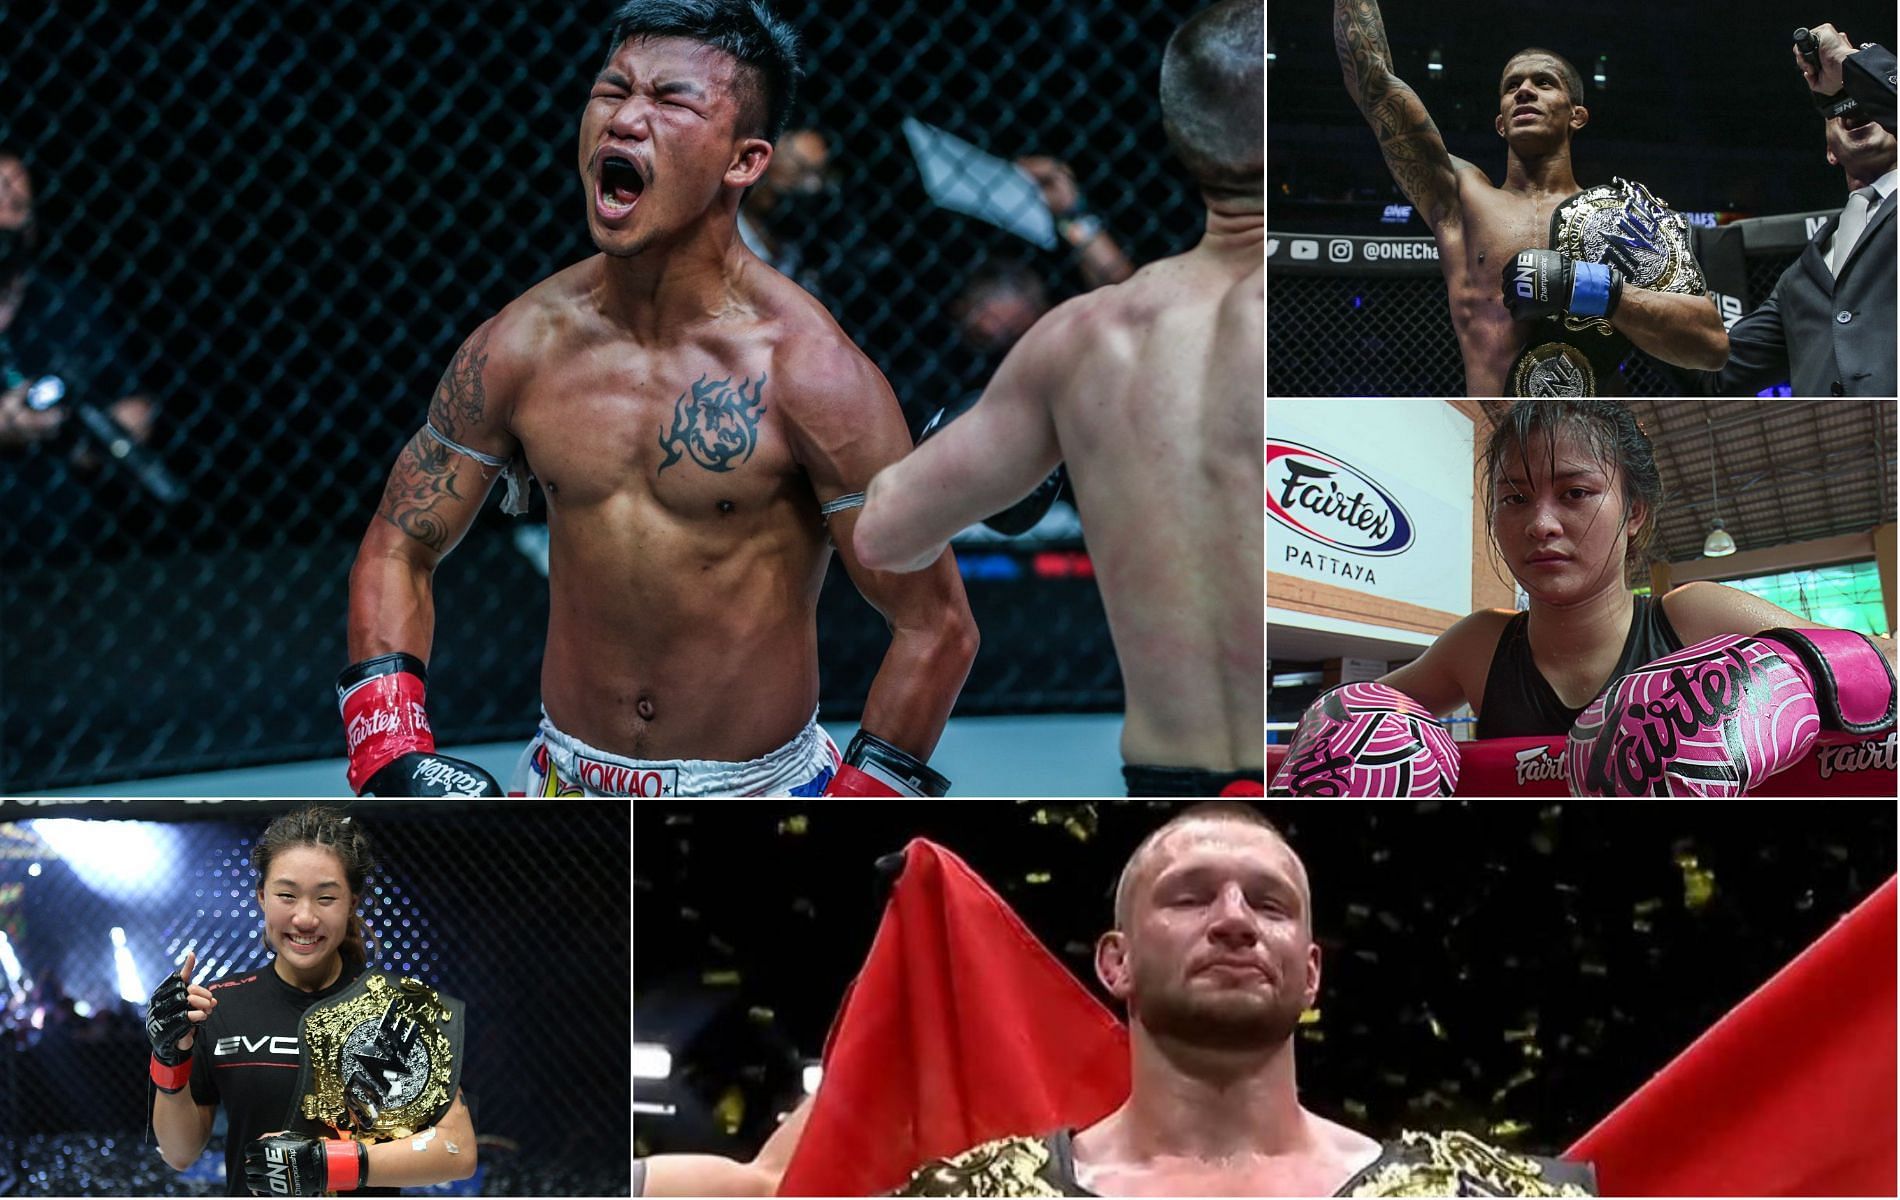 Clockwise from top left: Rodtang Jitmuangnon, Adriano Moraes, Stamp Fairtex, Reinier de Ridder, and Angela Lee [Photo Credits: ONE Championship]